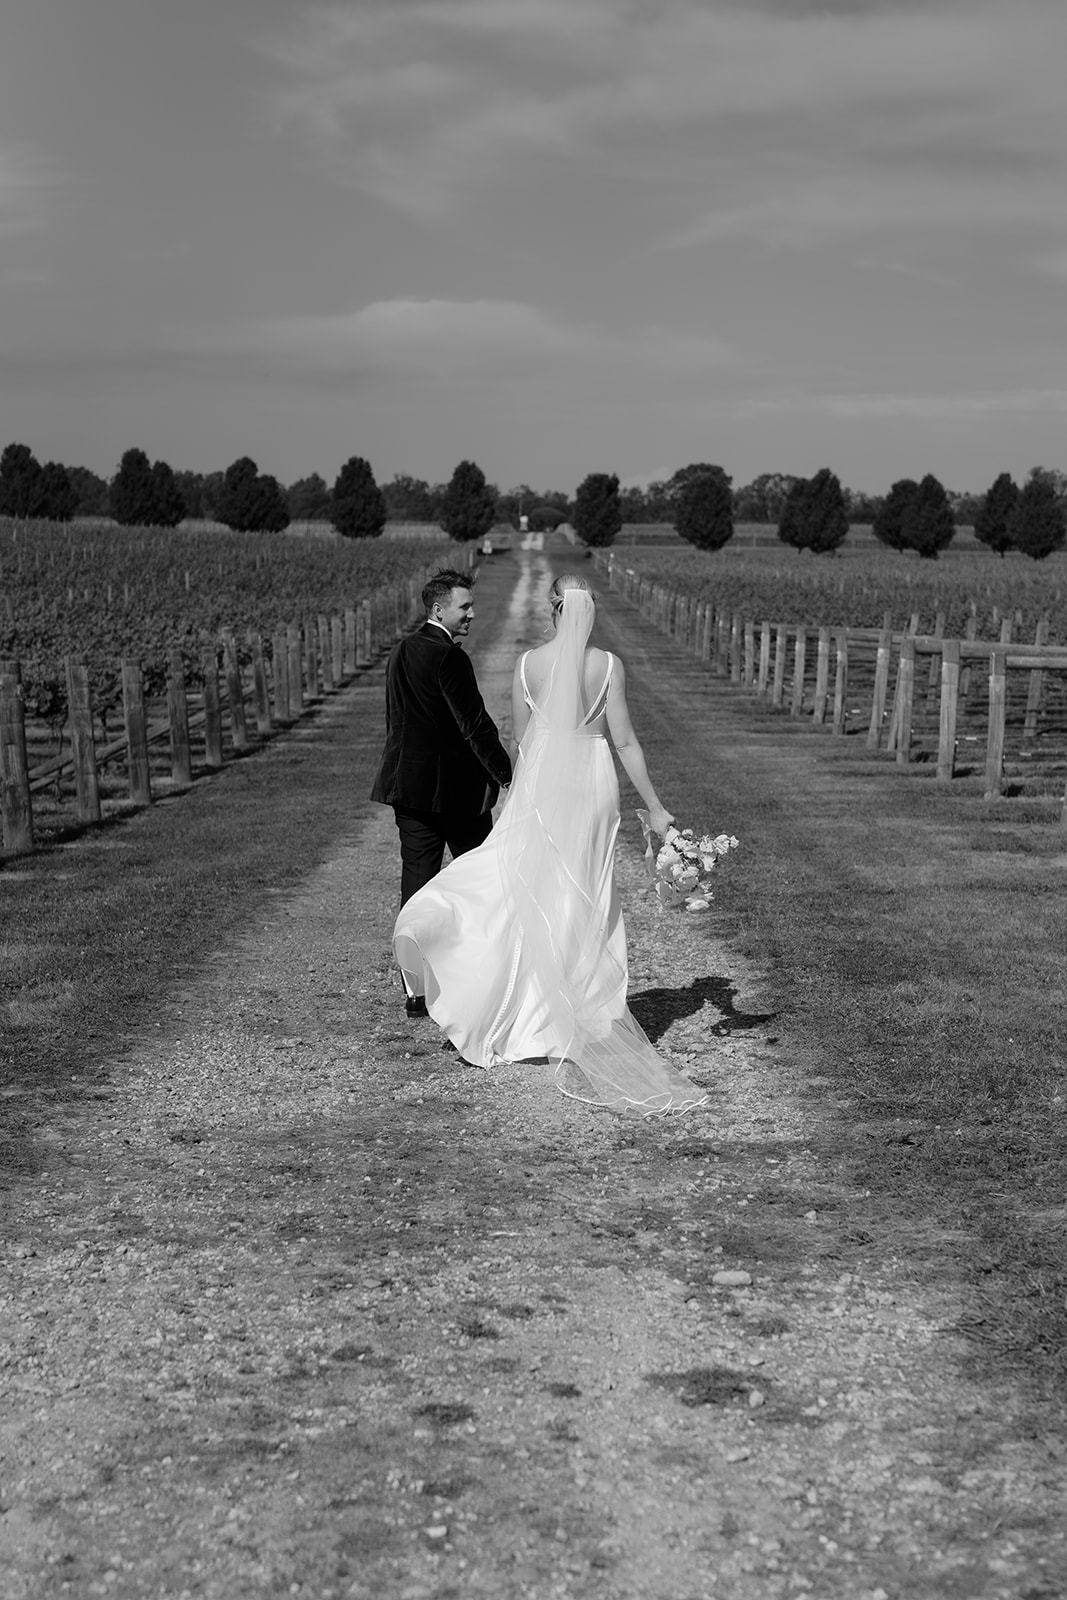 zoe and nathan walking through the winery at mitchelton wine wedding venue